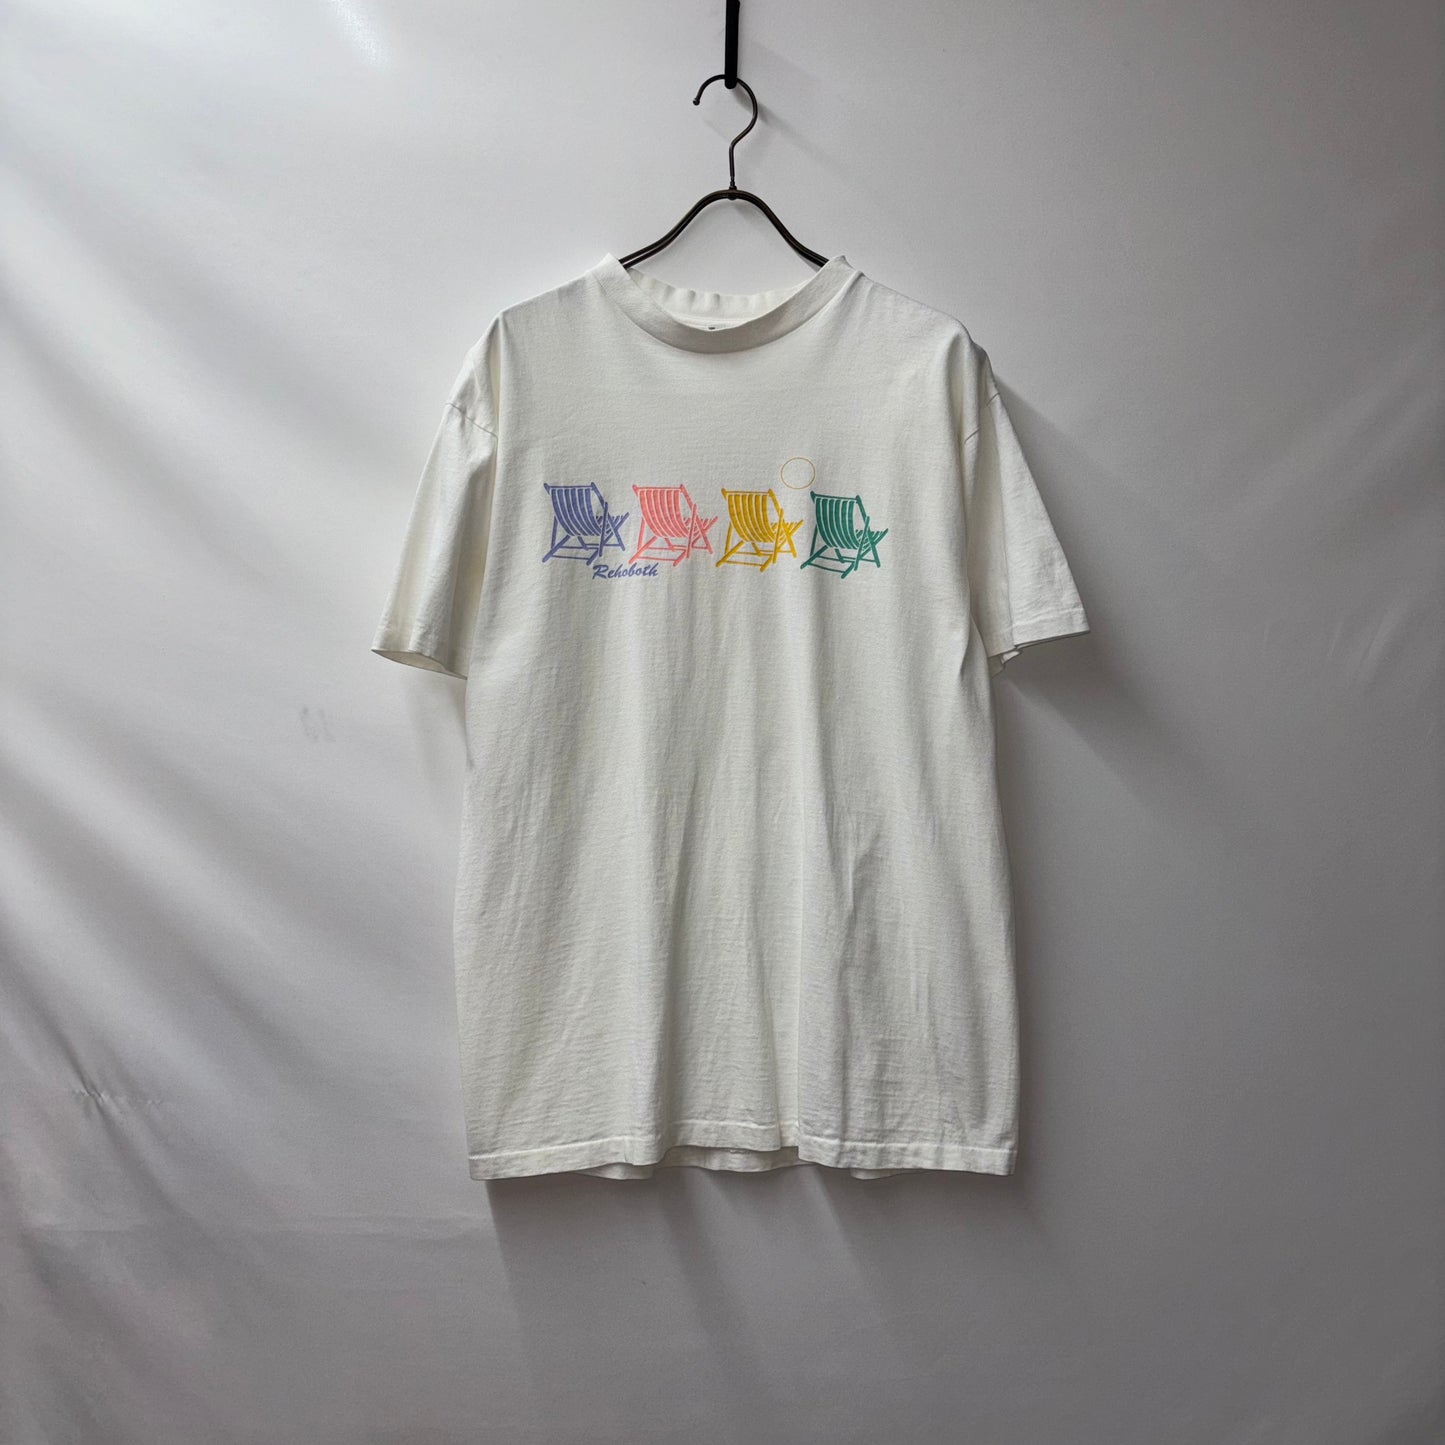 90s vintage chair Tee USA製　シングルステッチ